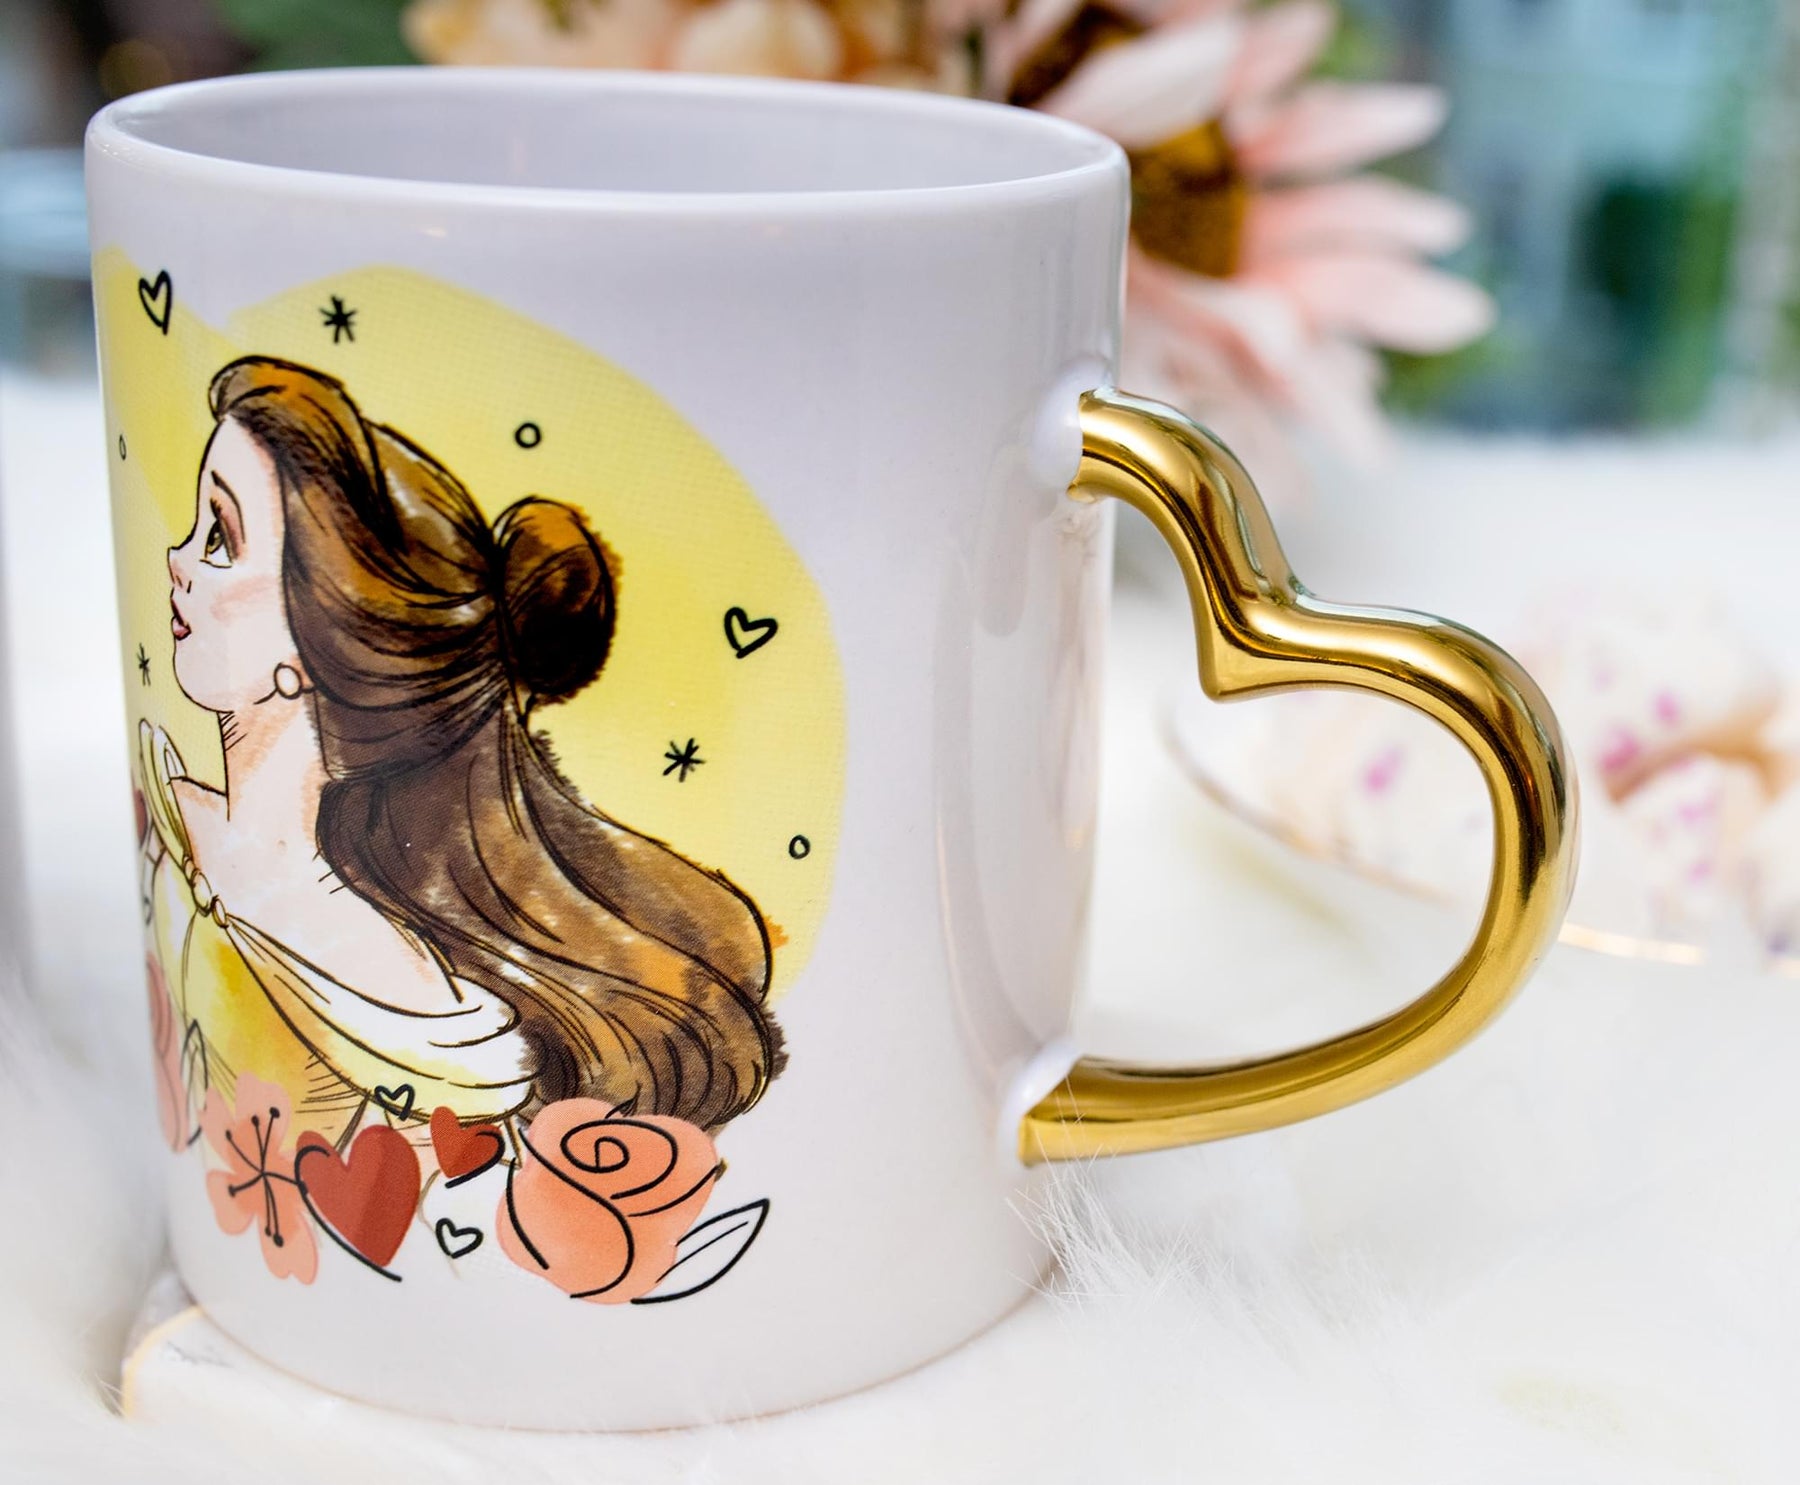 Ceramic Disney Princess Mugs, Heart Shaped Handle Coffee Mugs, Disney Mugs,  Princess Mugs, Mugs, Gifts for Her, Gifts for Kids, Coffee Cup 